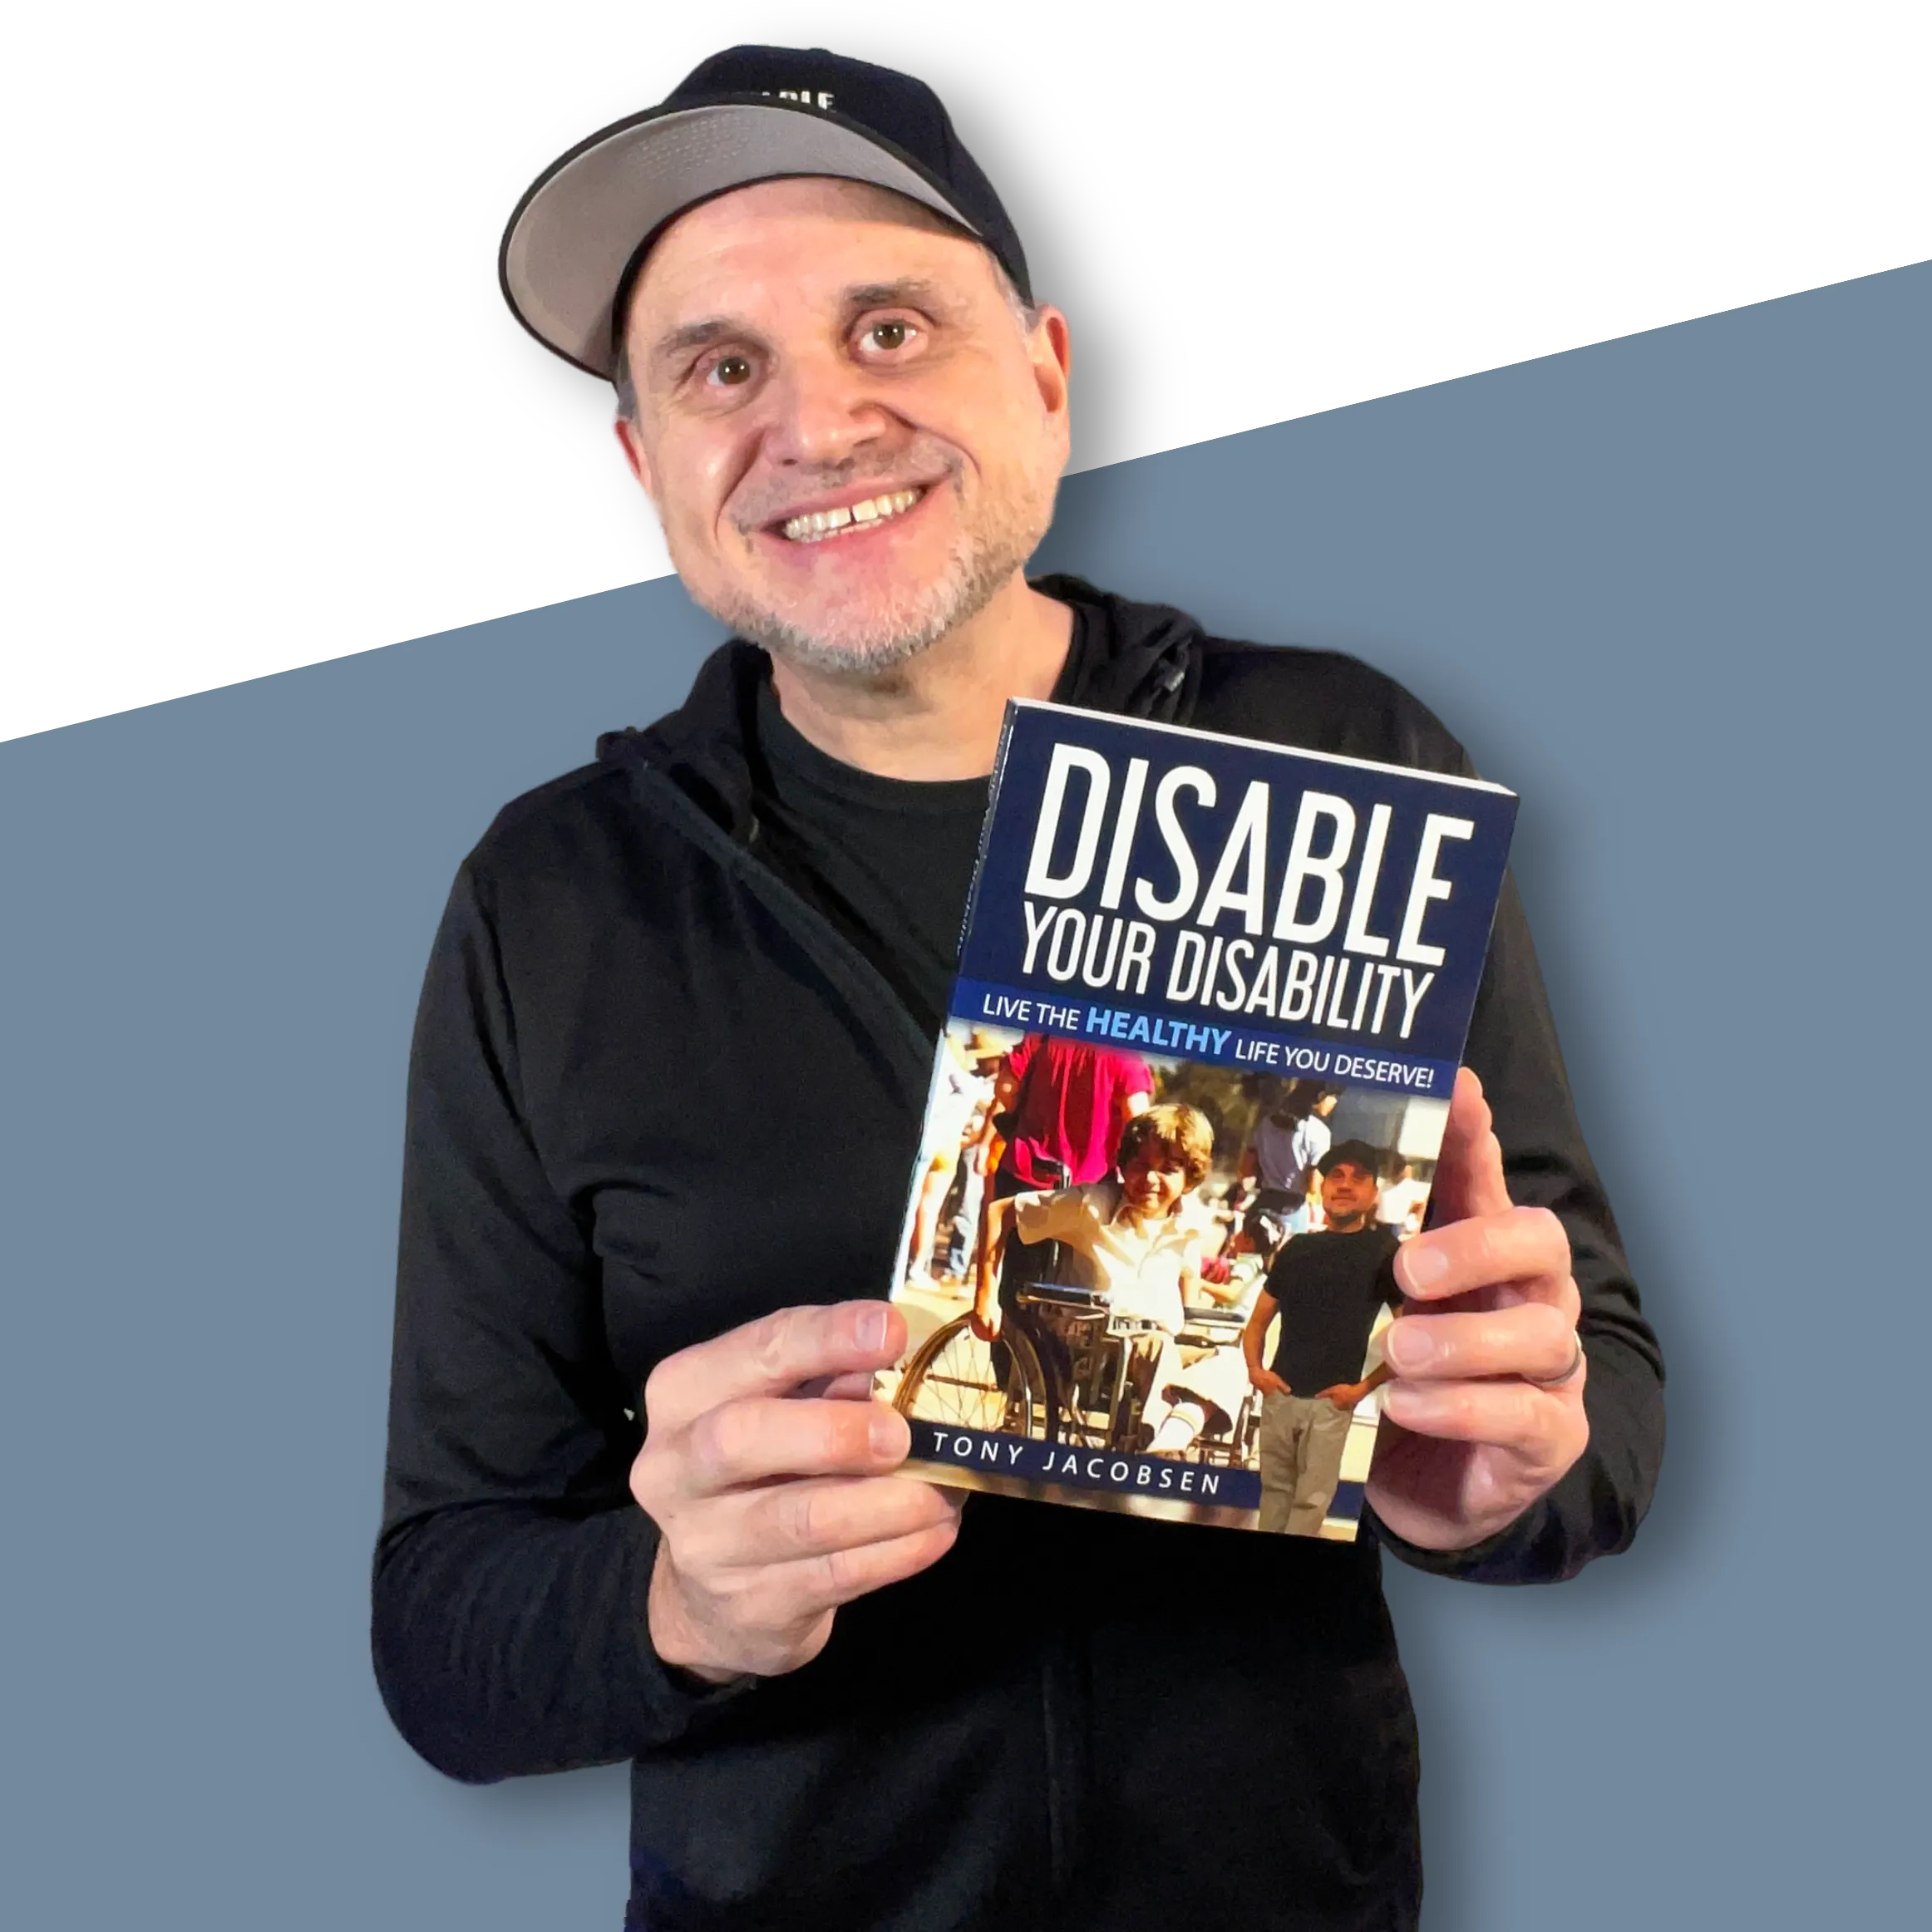 Tony Jacobsen displaying his book Disable Your Disability